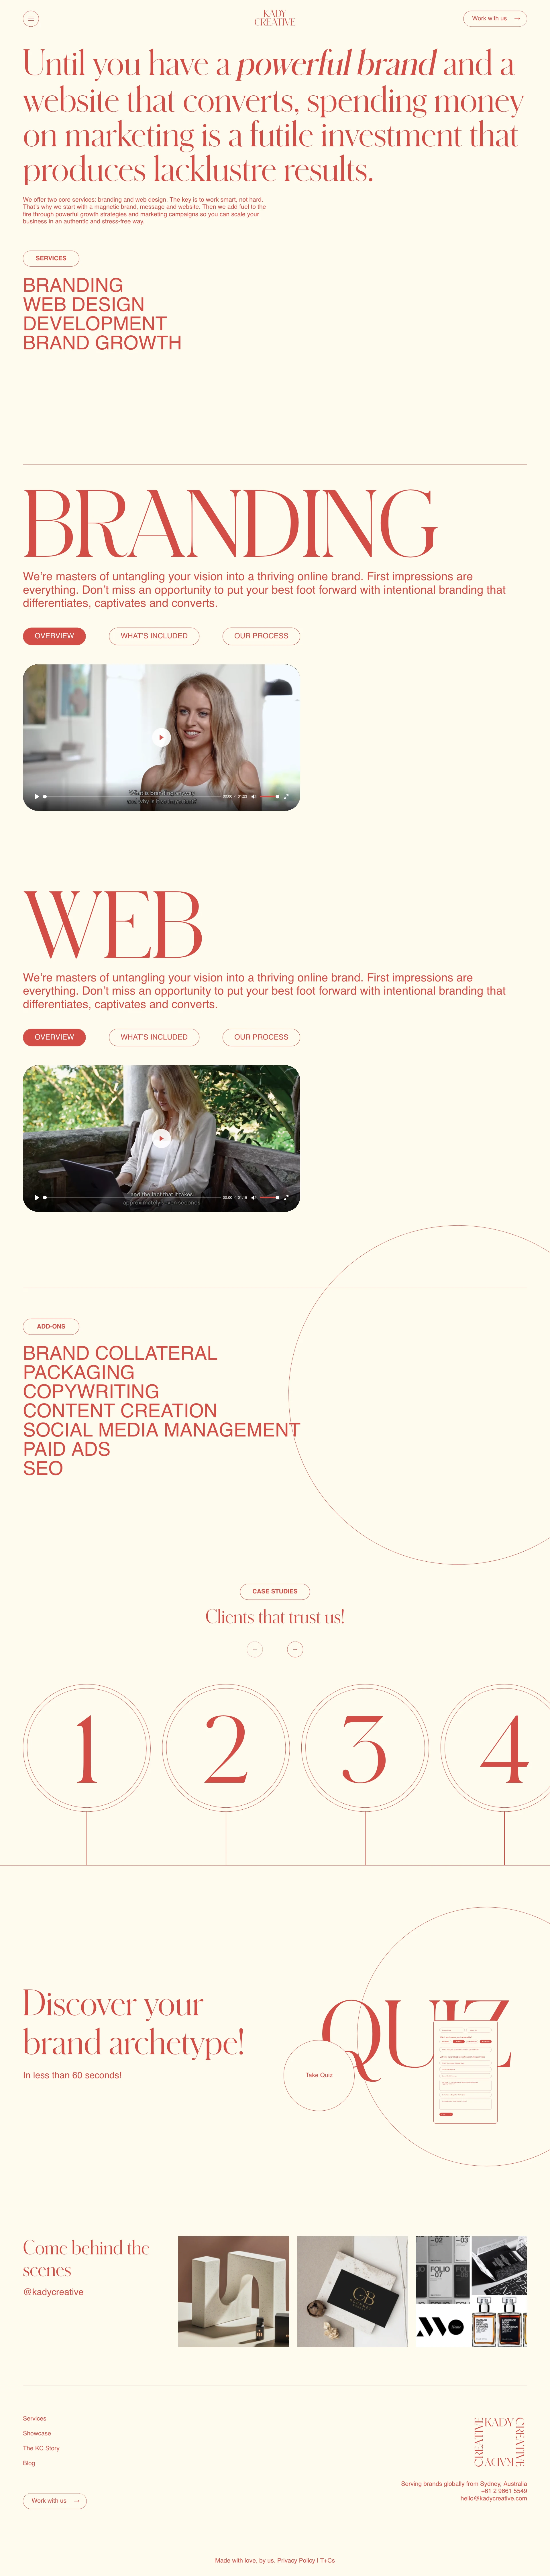 Kady Creative Landing Page Example: KC is an award-winning agency, working with lifestyle brands and entrepreneurs globally to cultivate the brands of tomorrow.